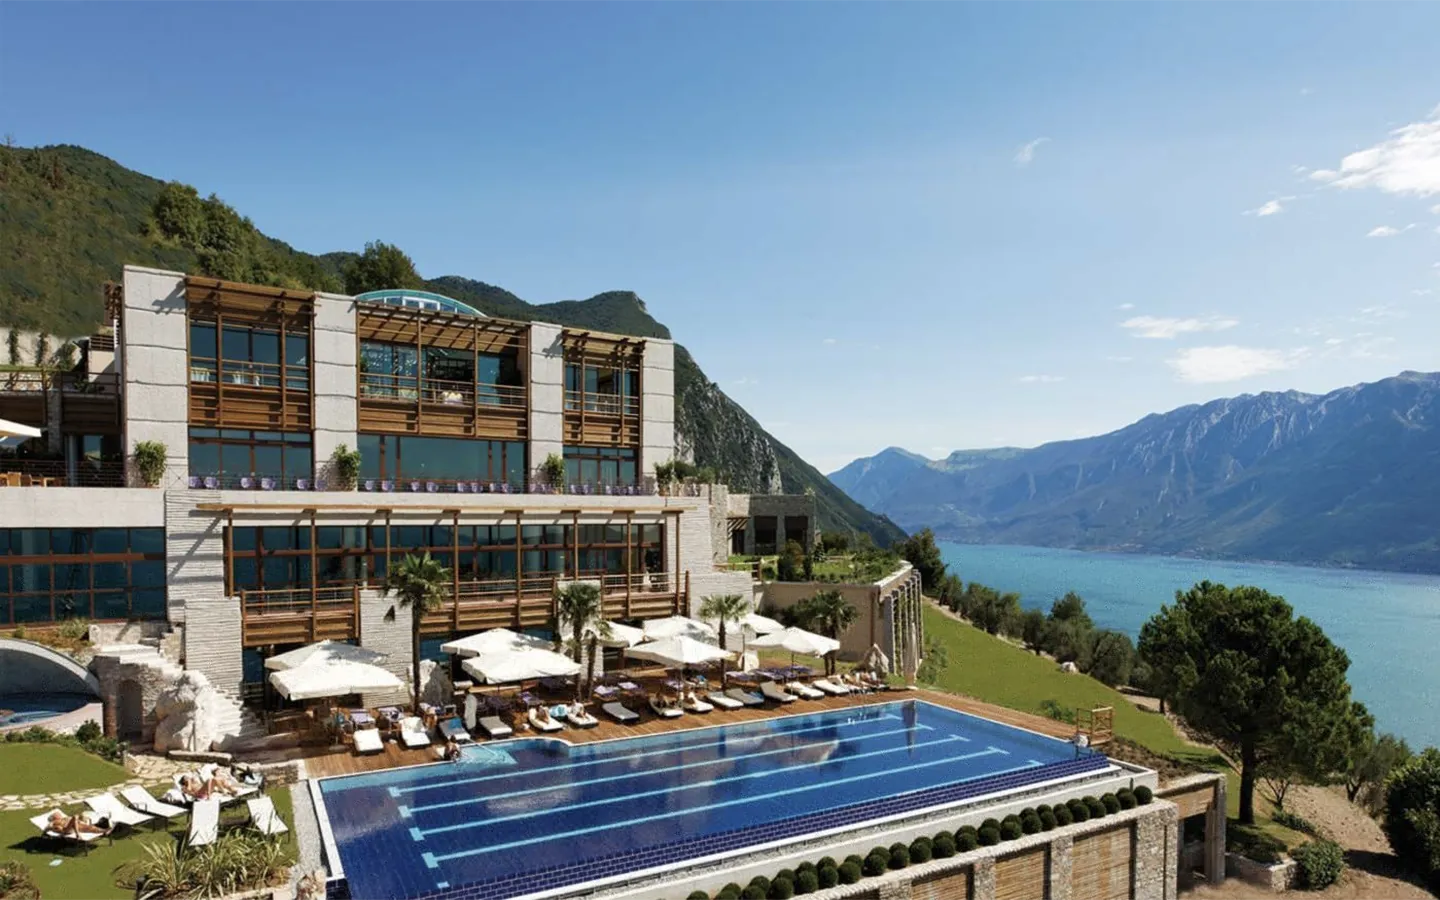 Stay in five-star resorts overlooking Lake Garda and Lake Como on a luxury tour of Italy